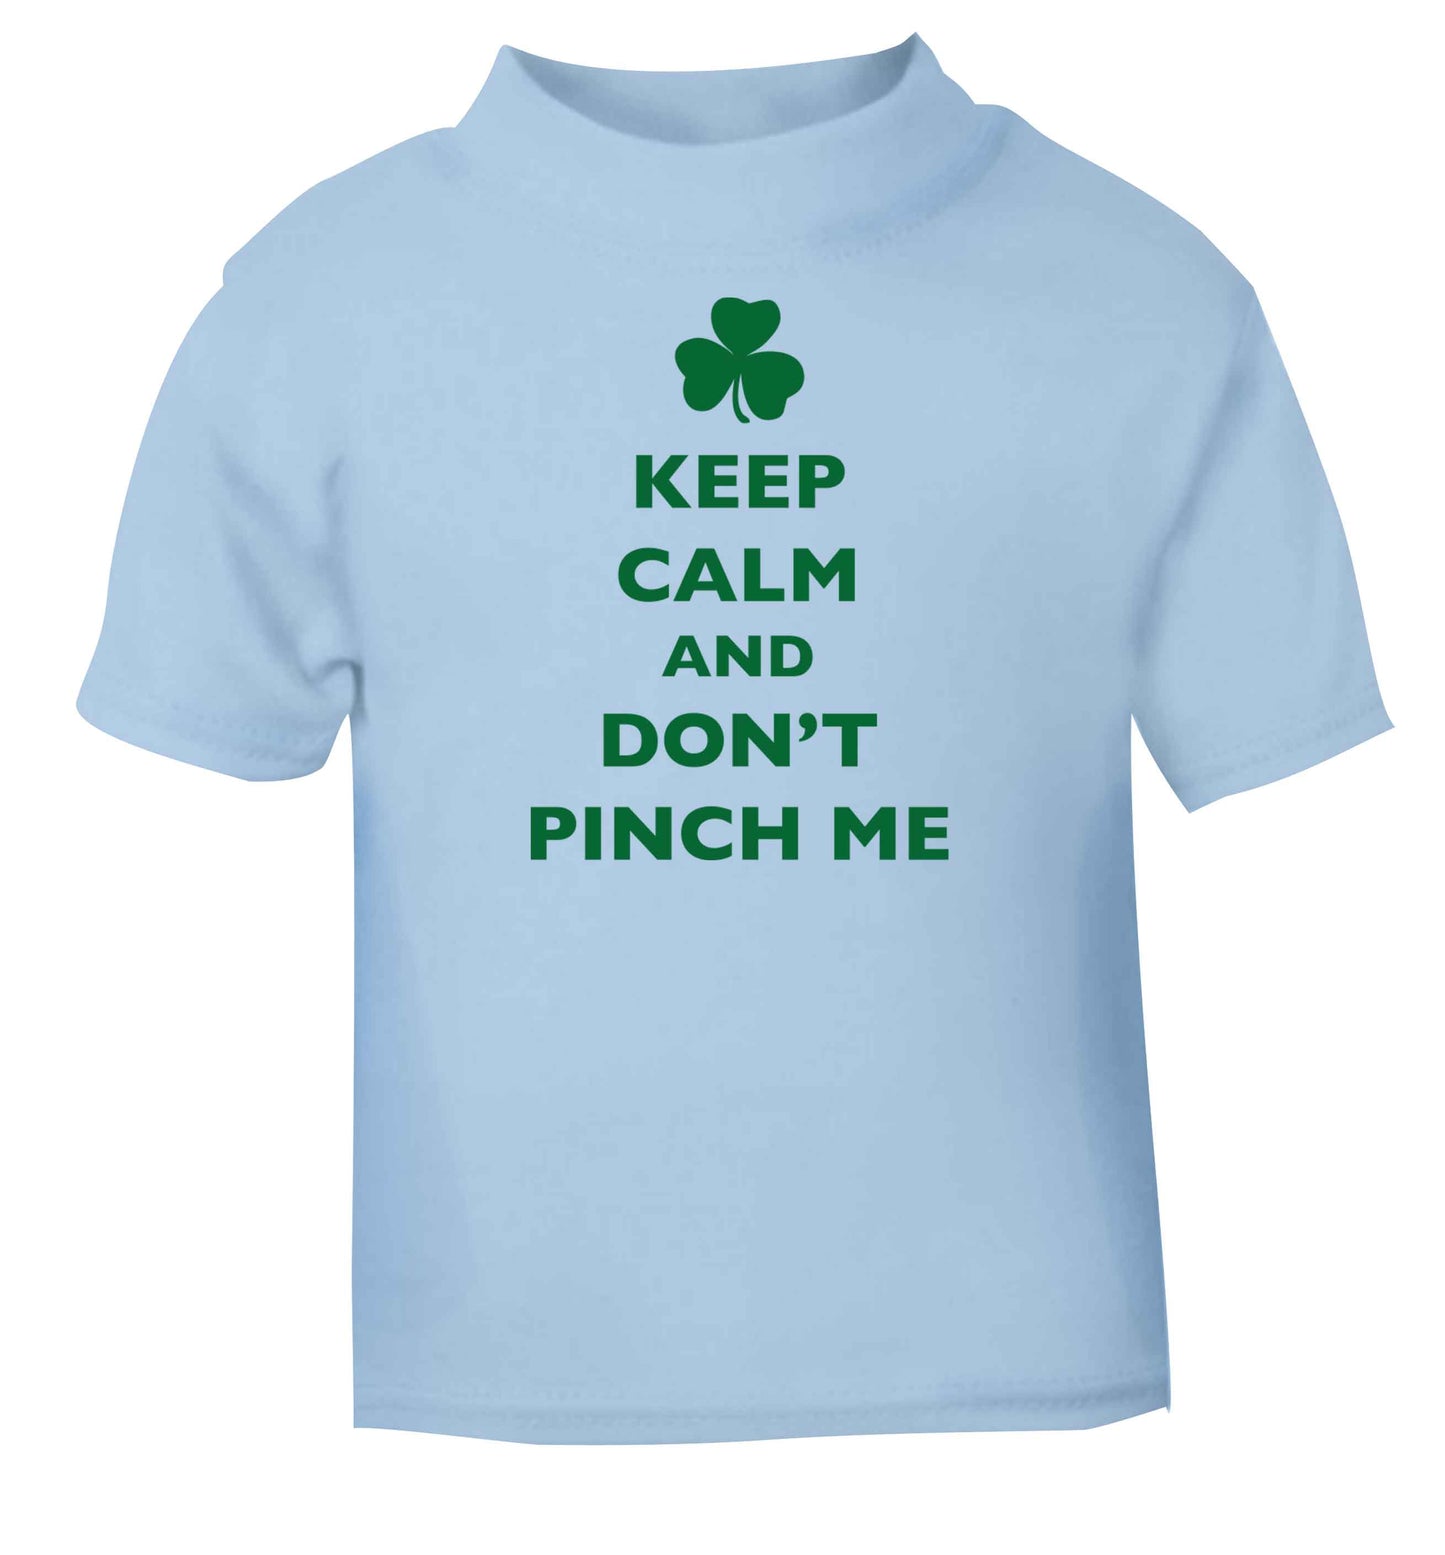 Keep calm and don't pinch me light blue baby toddler Tshirt 2 Years